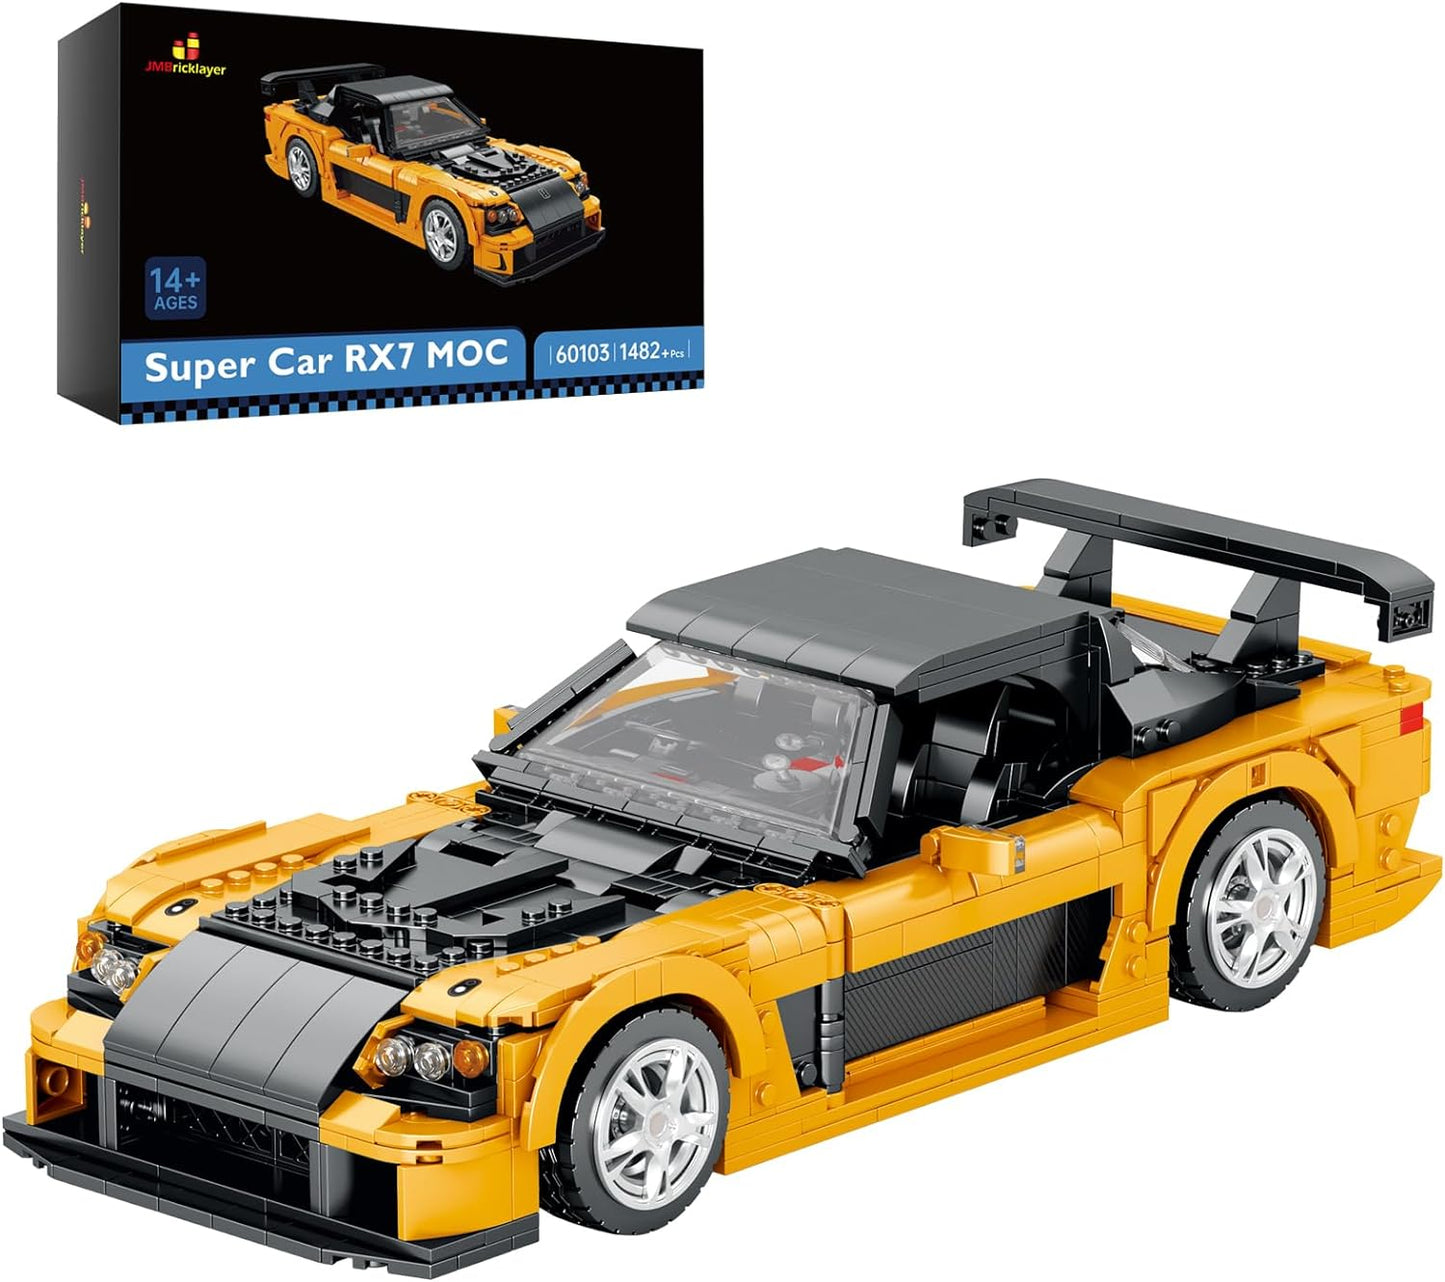 JMBricklayer SRT Muscle Cars Building Block 60105, 1:12 Scale Collectible Model Car Kits for Adults, Technical Sports Car Toy Building Sets, Gifts Idea for Car Fans, Kids Aged 8+(1,740 Pieces)